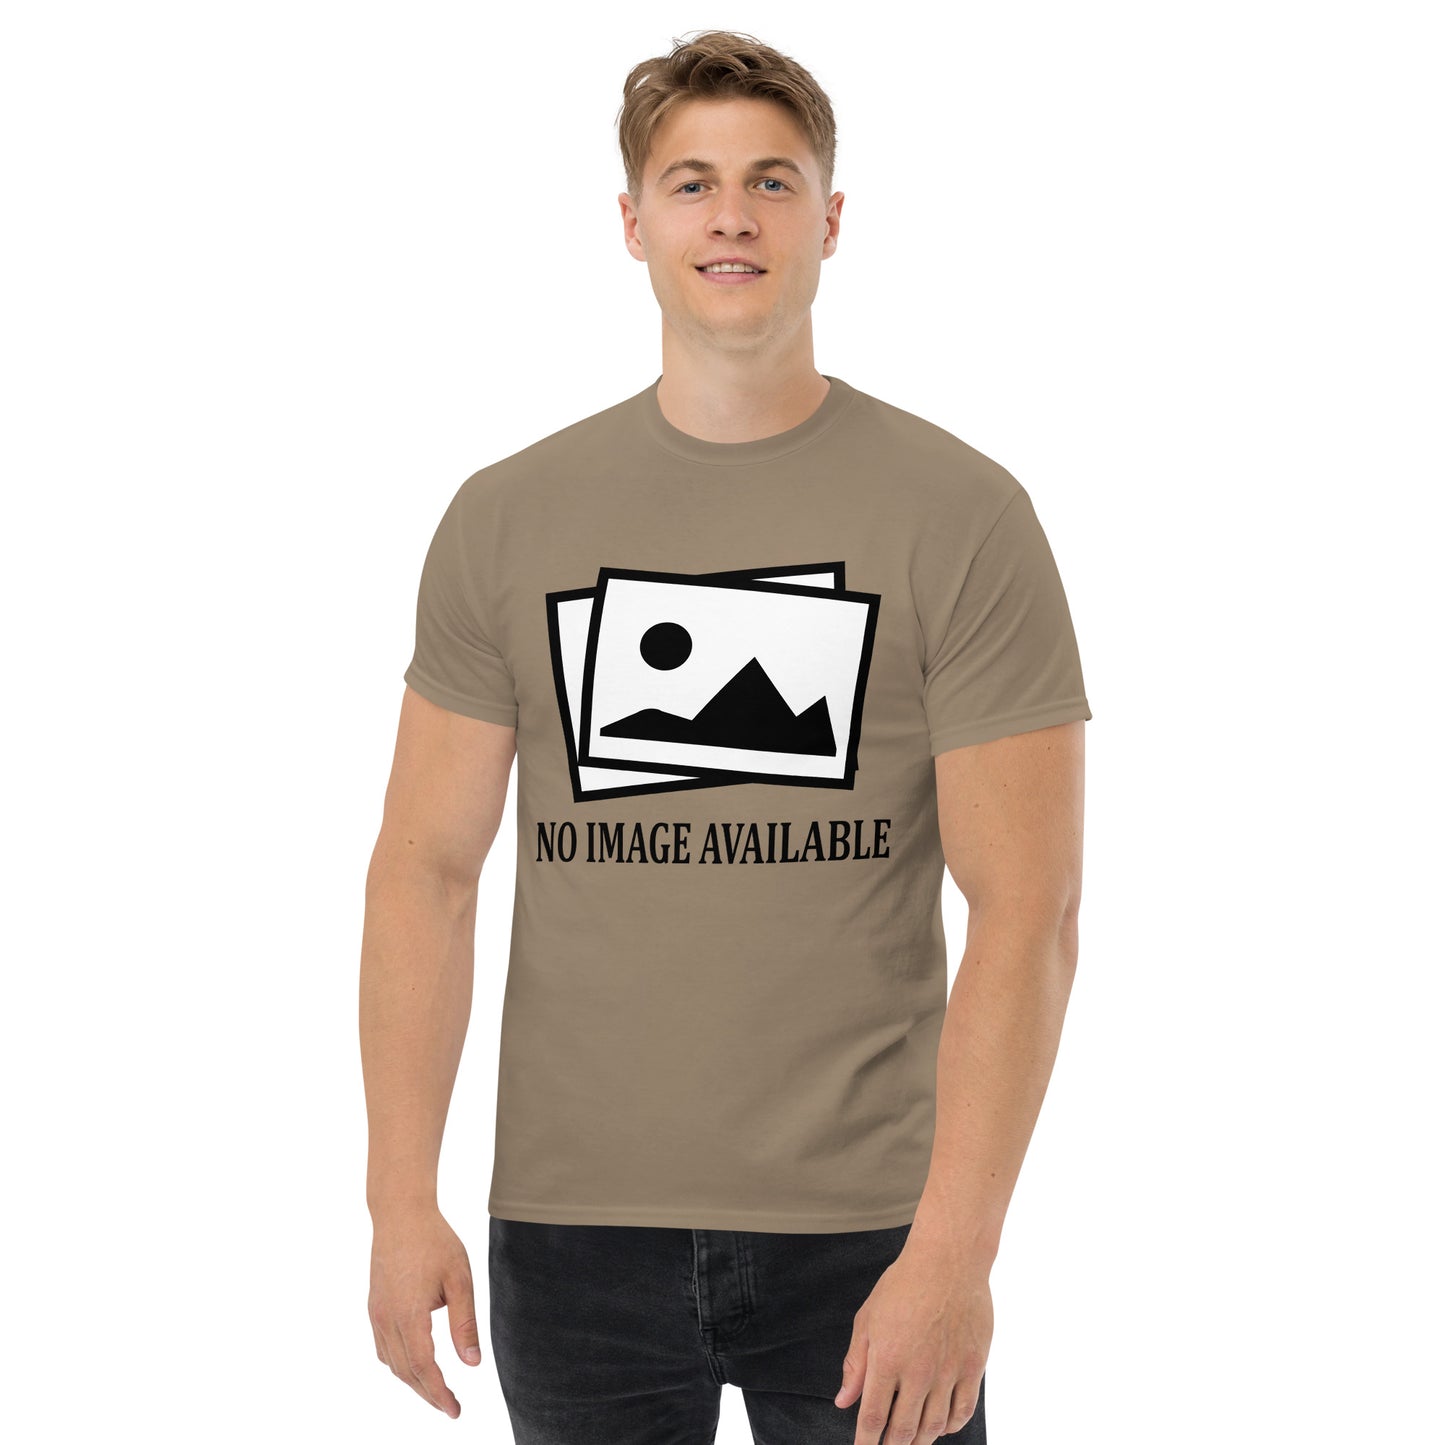 Men with brown t-shirt with image and text "no image available"